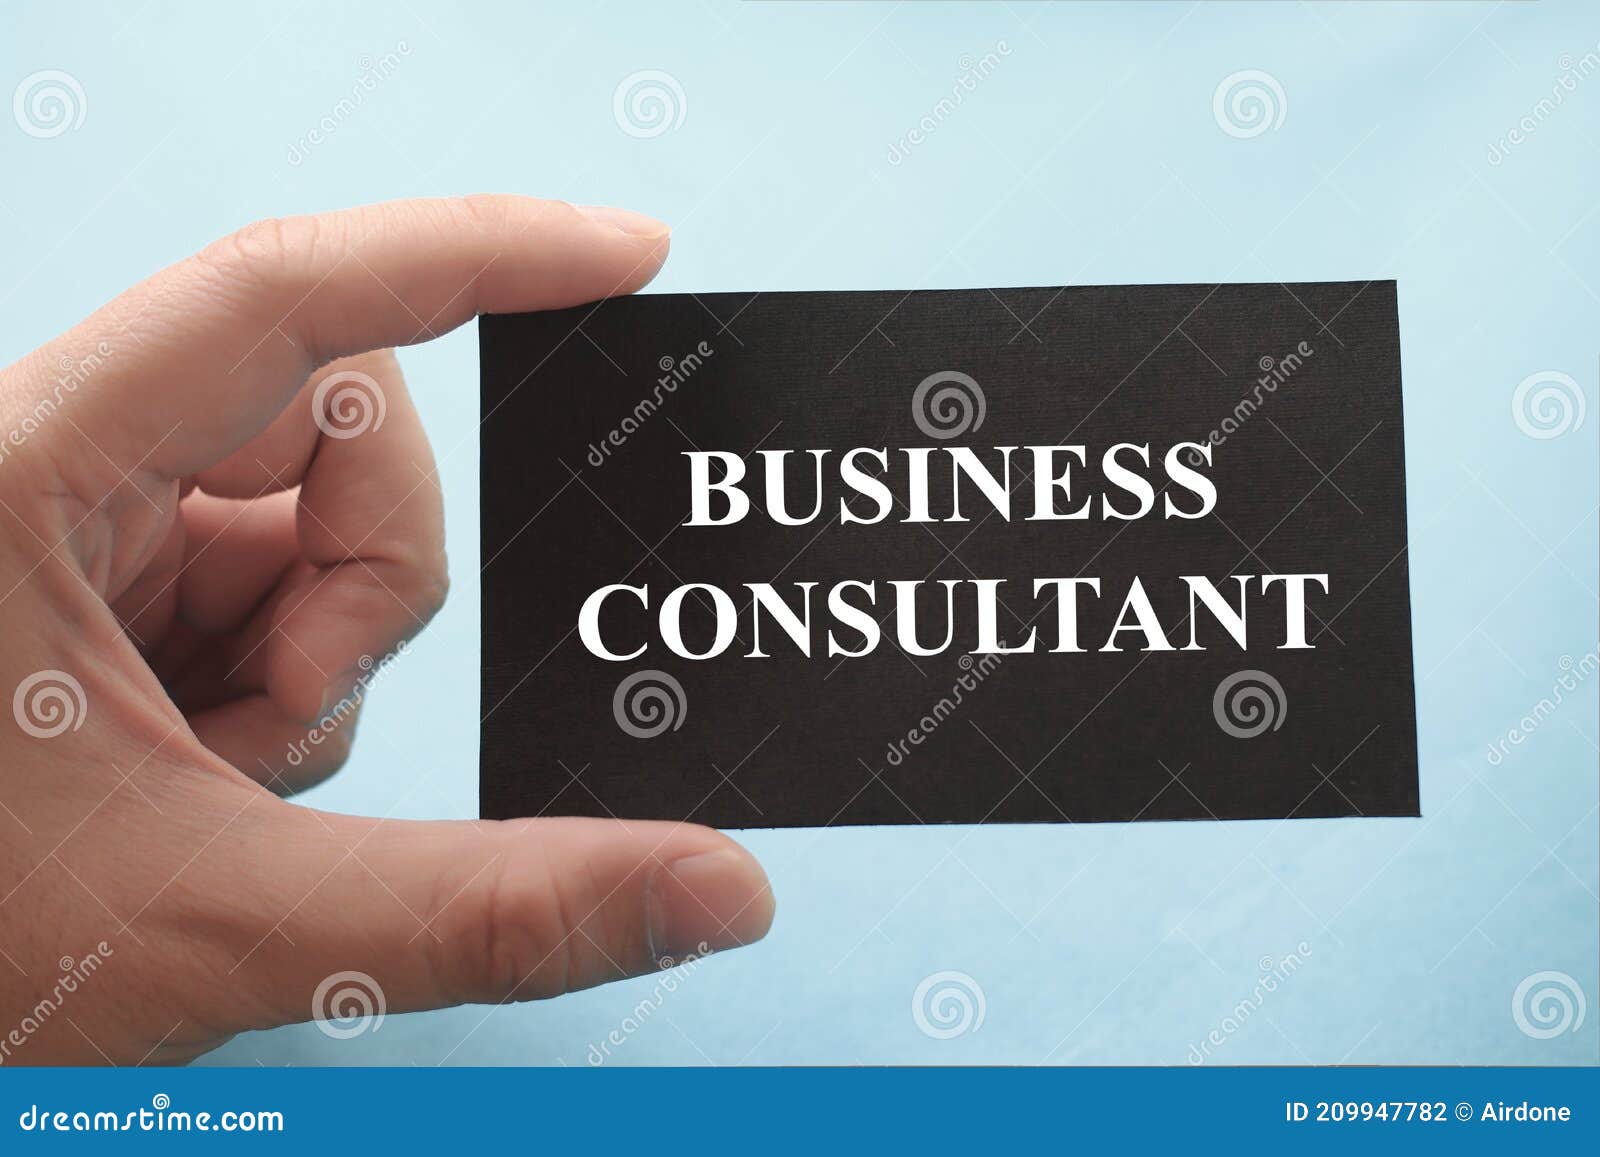 business consultant, text words typography written on paper against blue background, life and business motivational inspirational